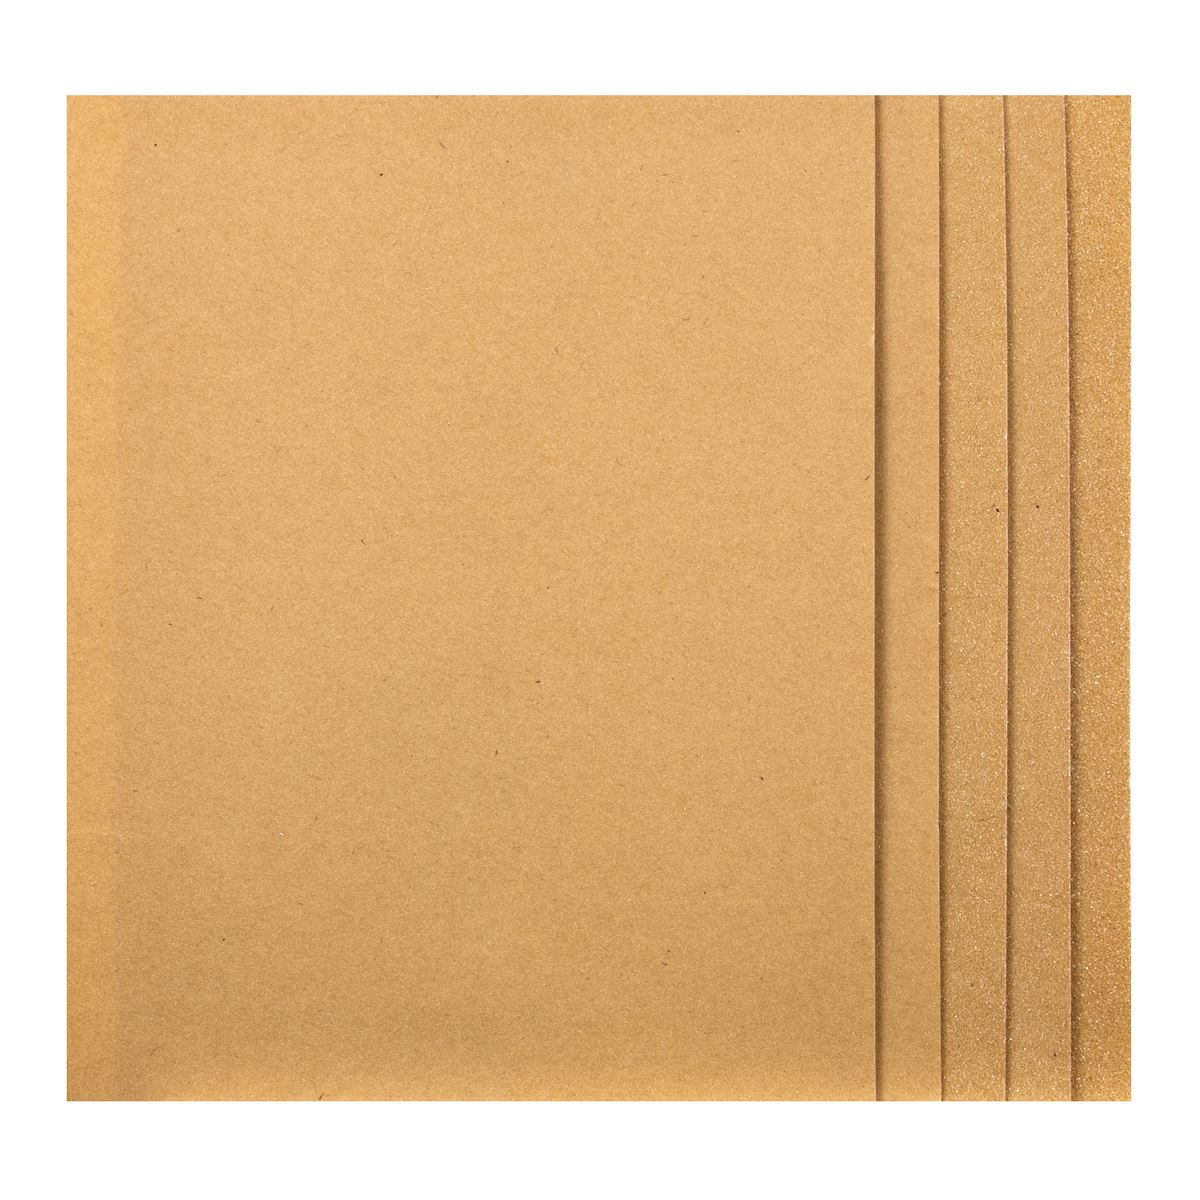 Worksafe by Sealey Glasspaper 280 x 230mm - Assorted Pack of 5